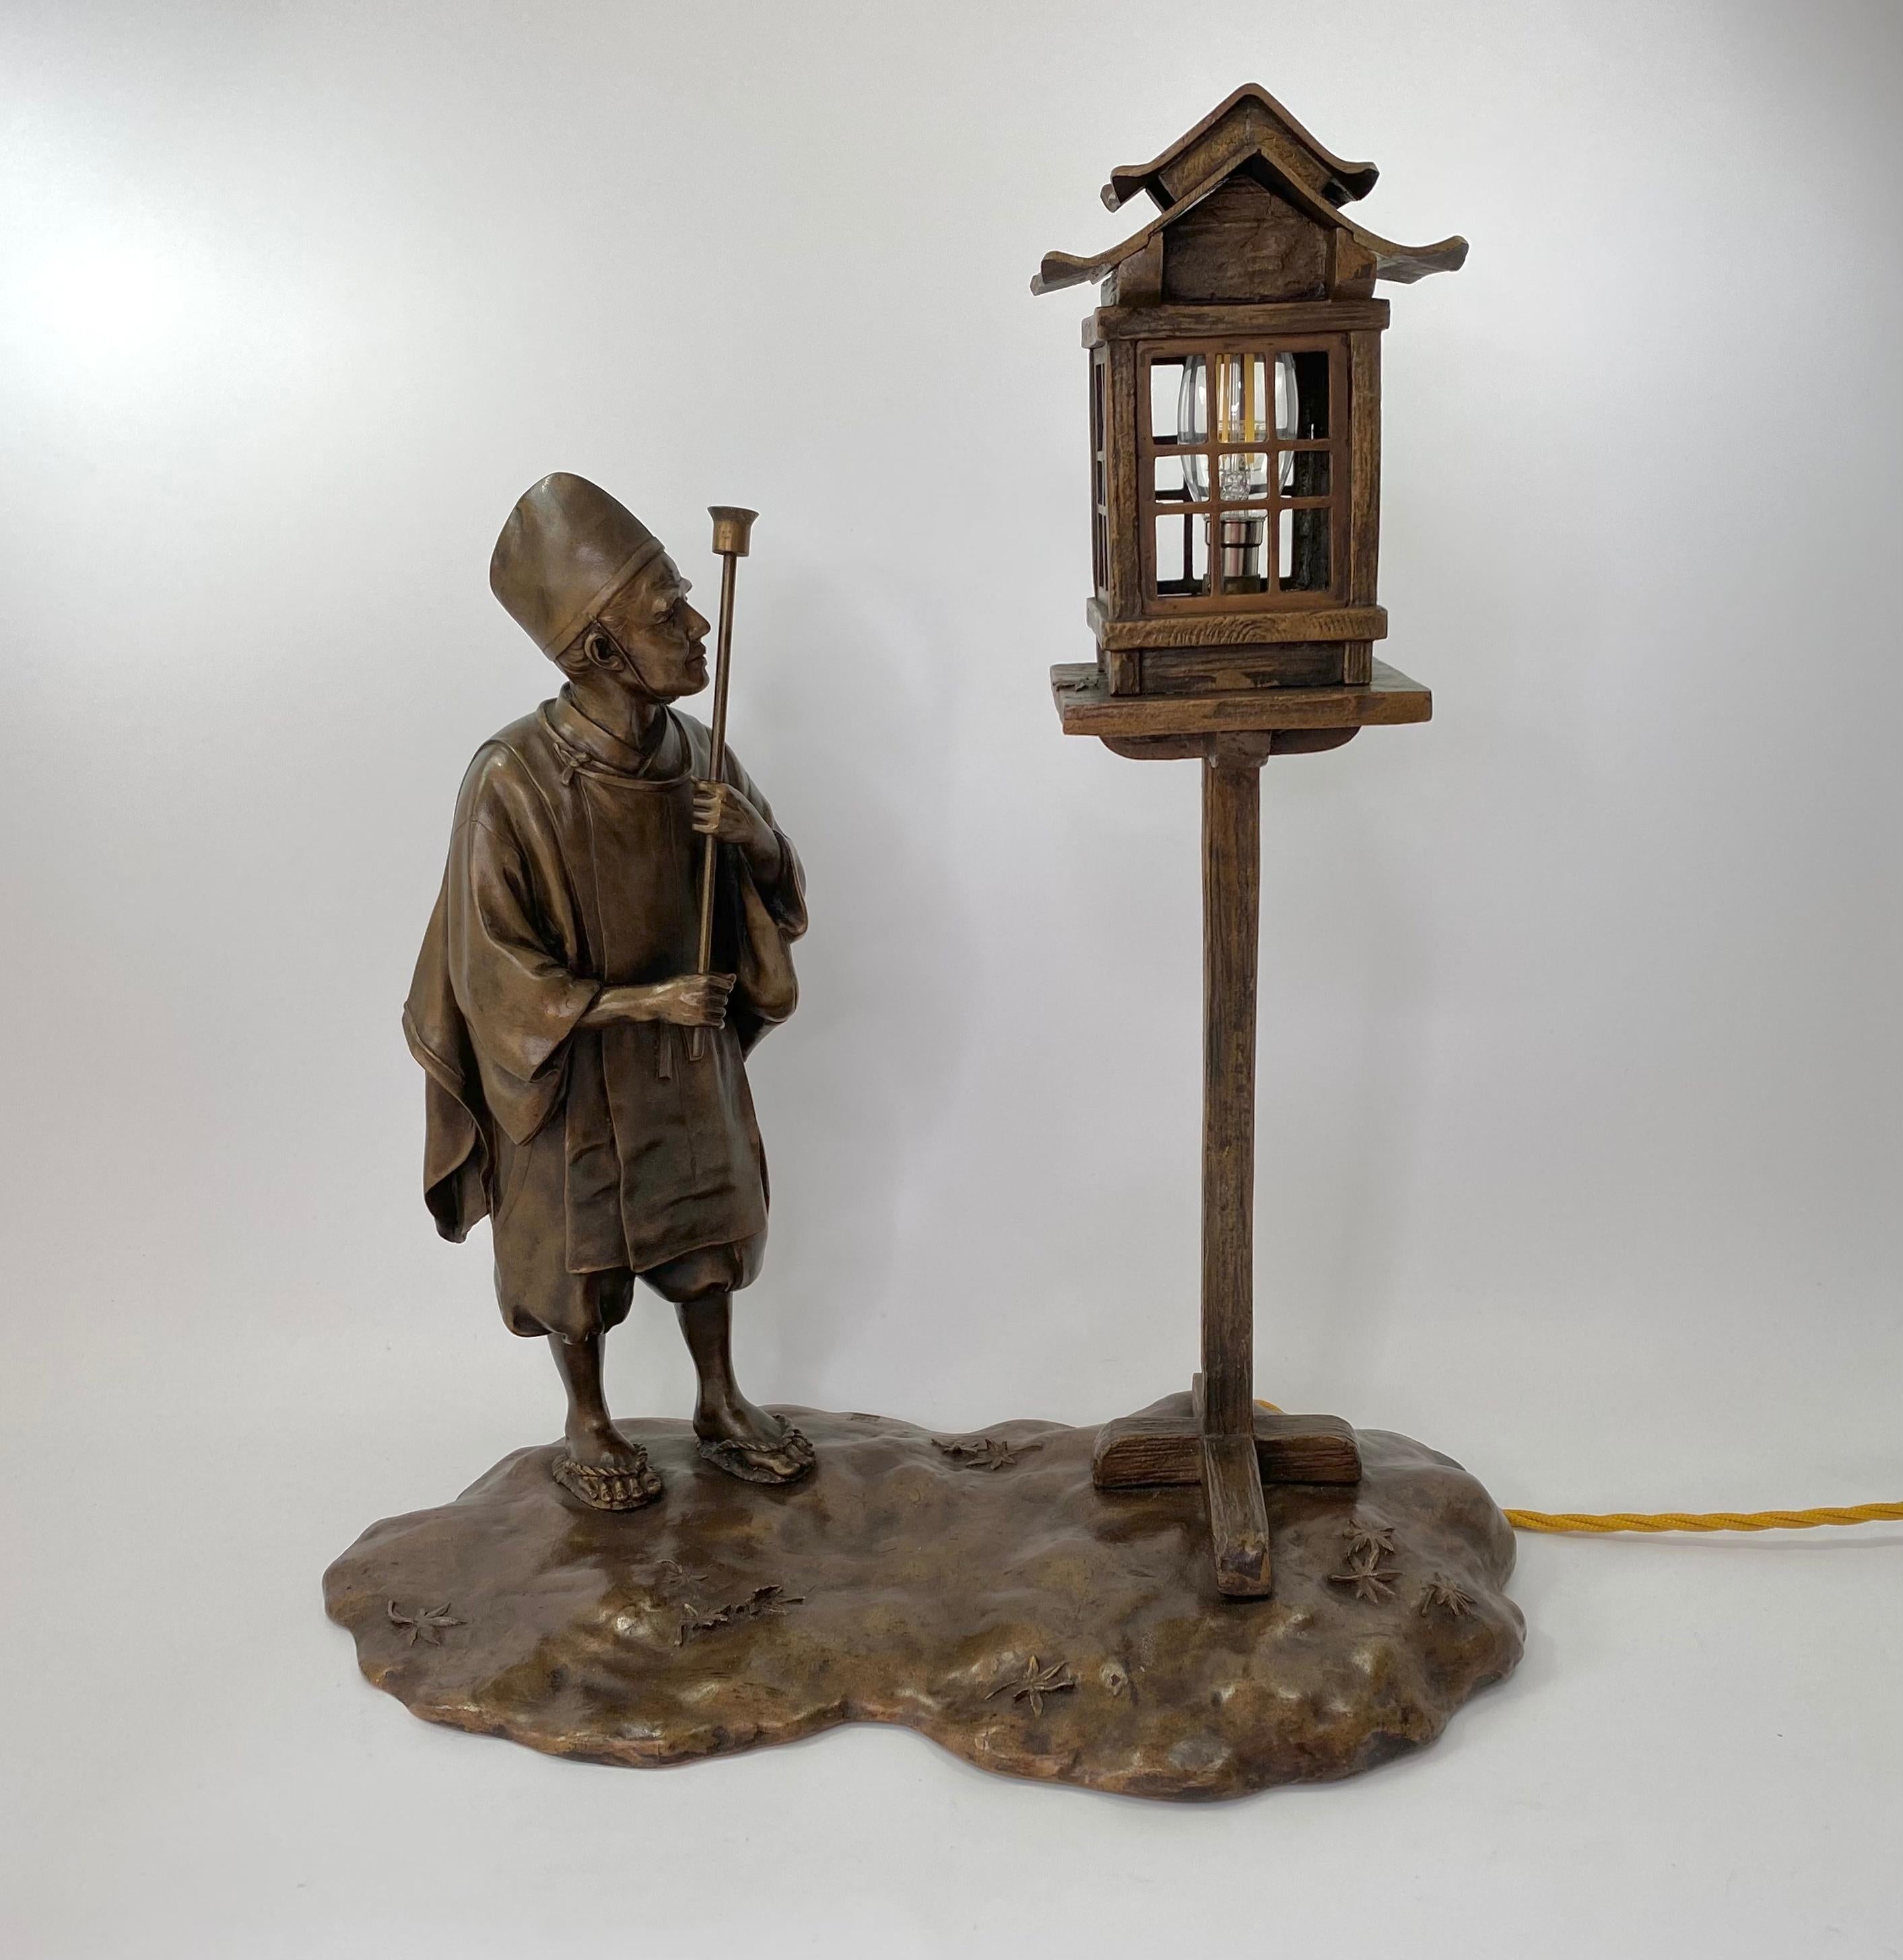 A fine Japanese bronze okimono lamp, signed Yoshitani,
????. c.1900, Meiji Period.
Modelled as a lamp lighter, holding a torch, whilst preparing to light a pagoda topped lamp, which is supported atop a wooden pedestal.
The shaped base cast with